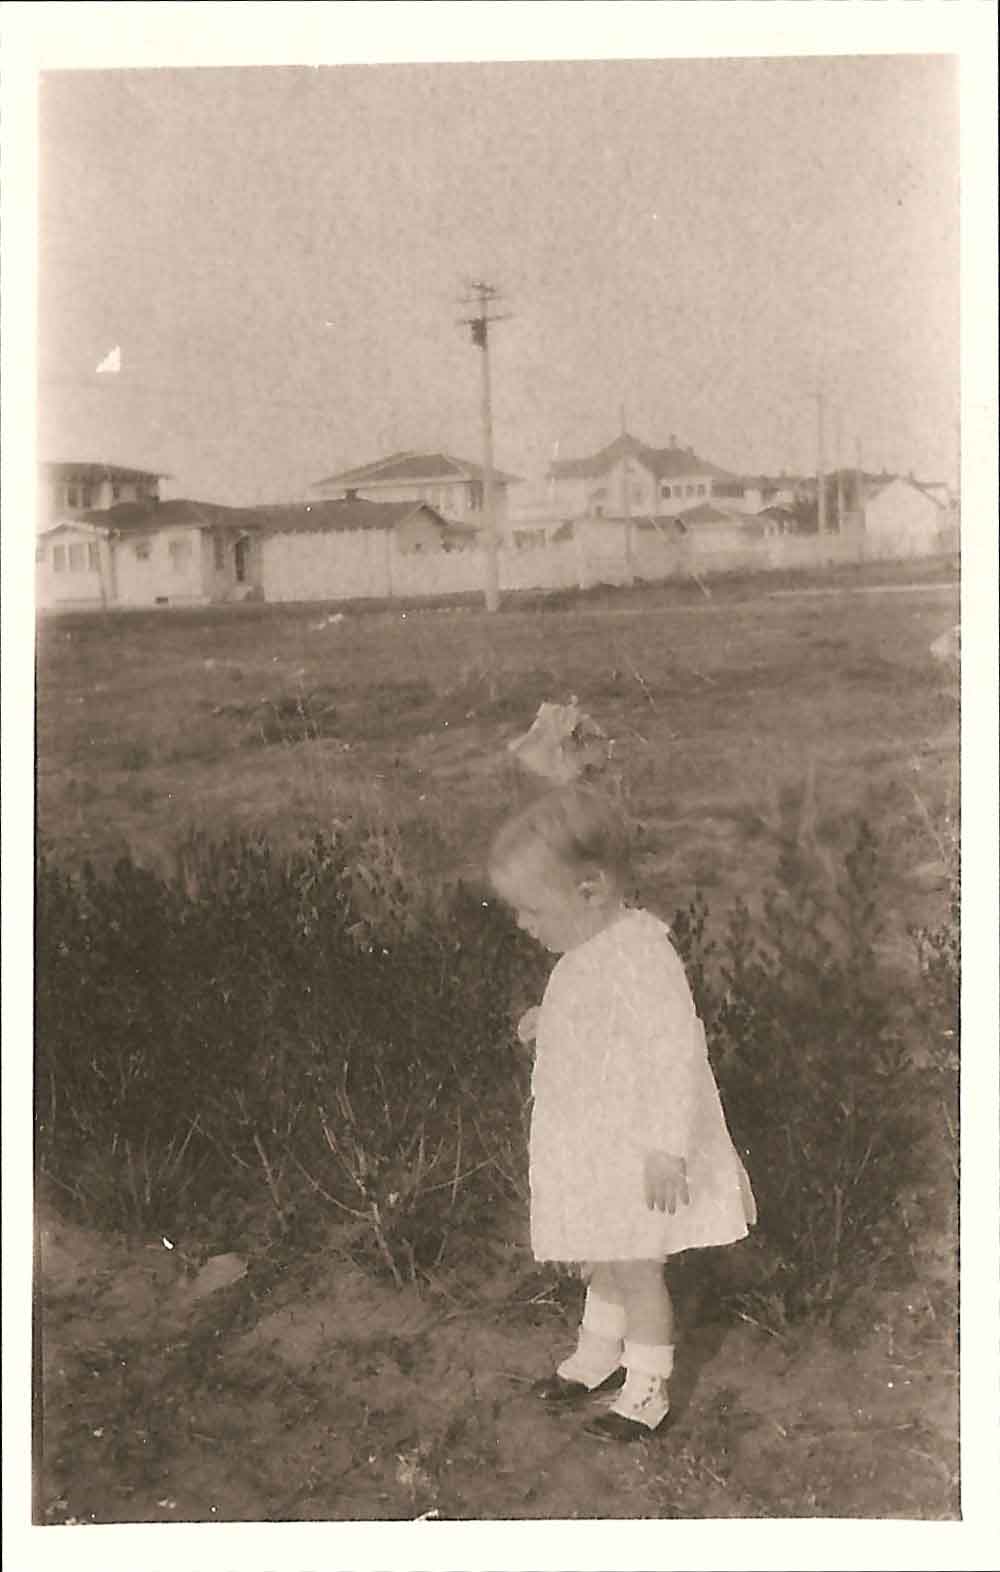 (HTC.2010.8.19) - Hightower Child (probably Frank) on the Drive of 409 NW 21, View Northeast of 300 Block of NW 22, c. 1926